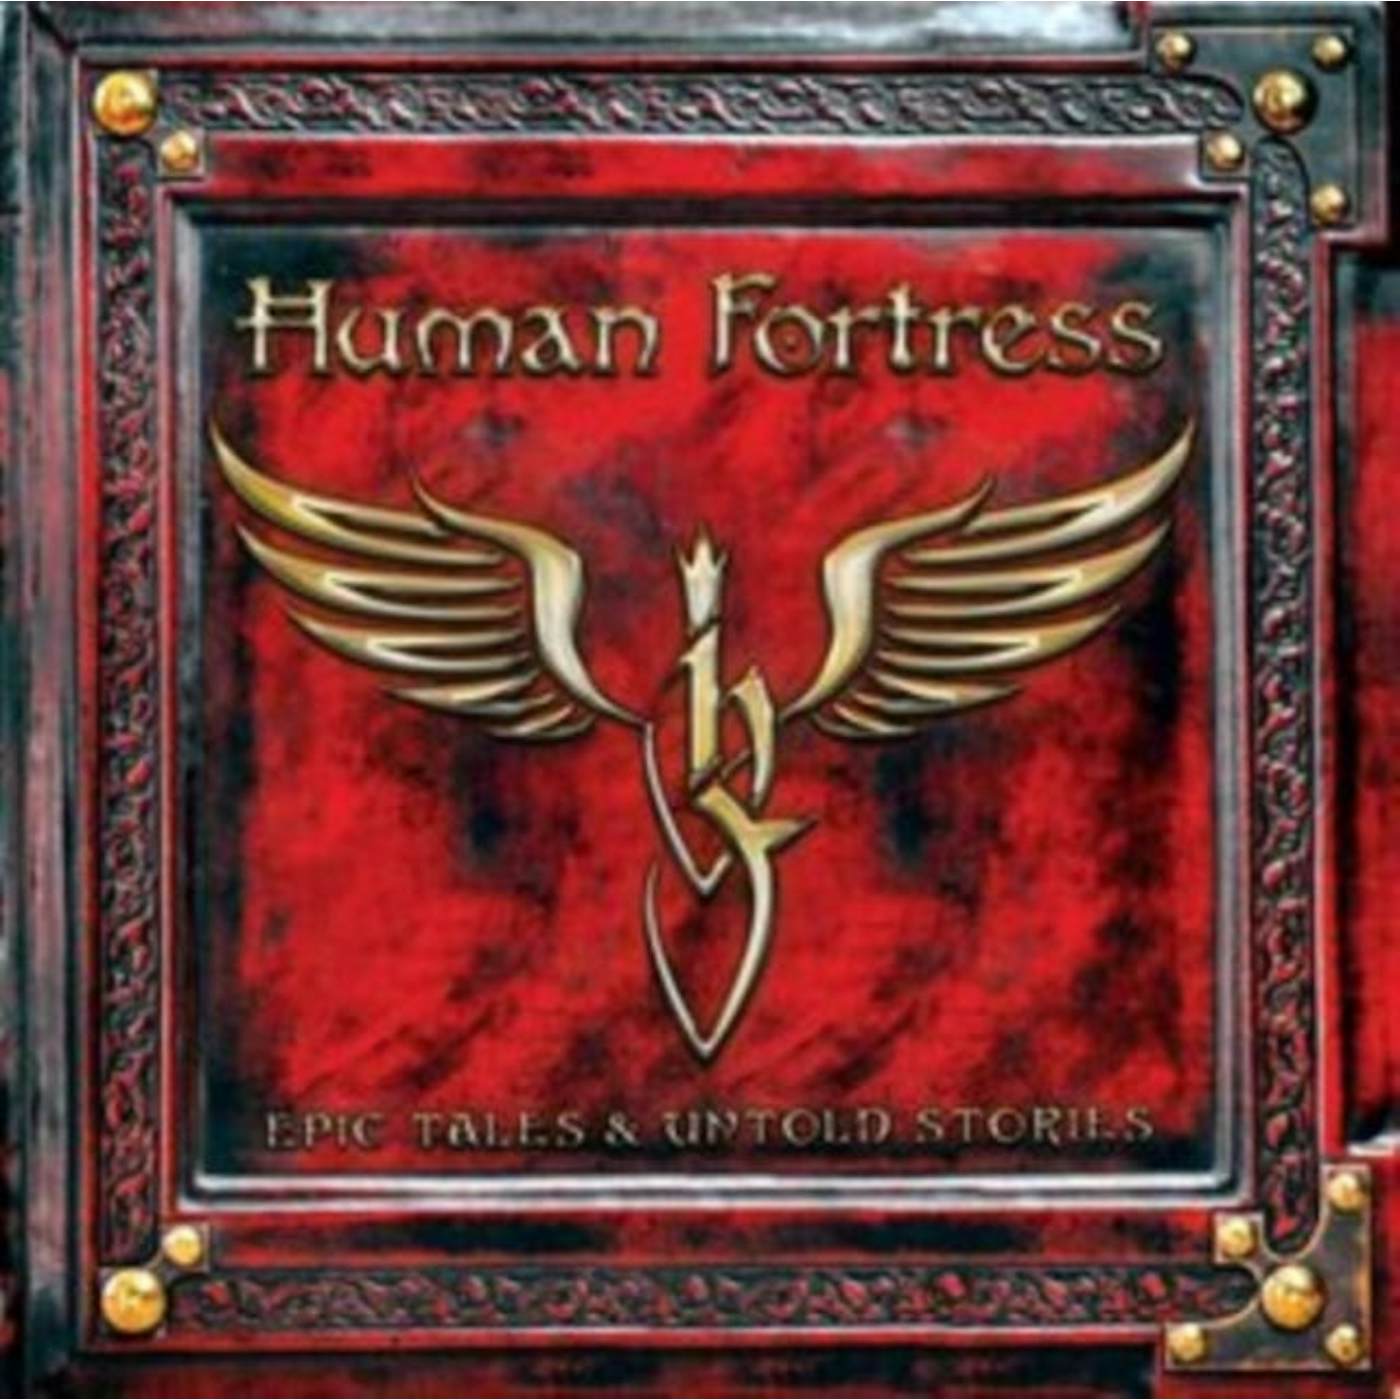 Human Fortress CD - Epic Tales & Untold Stories